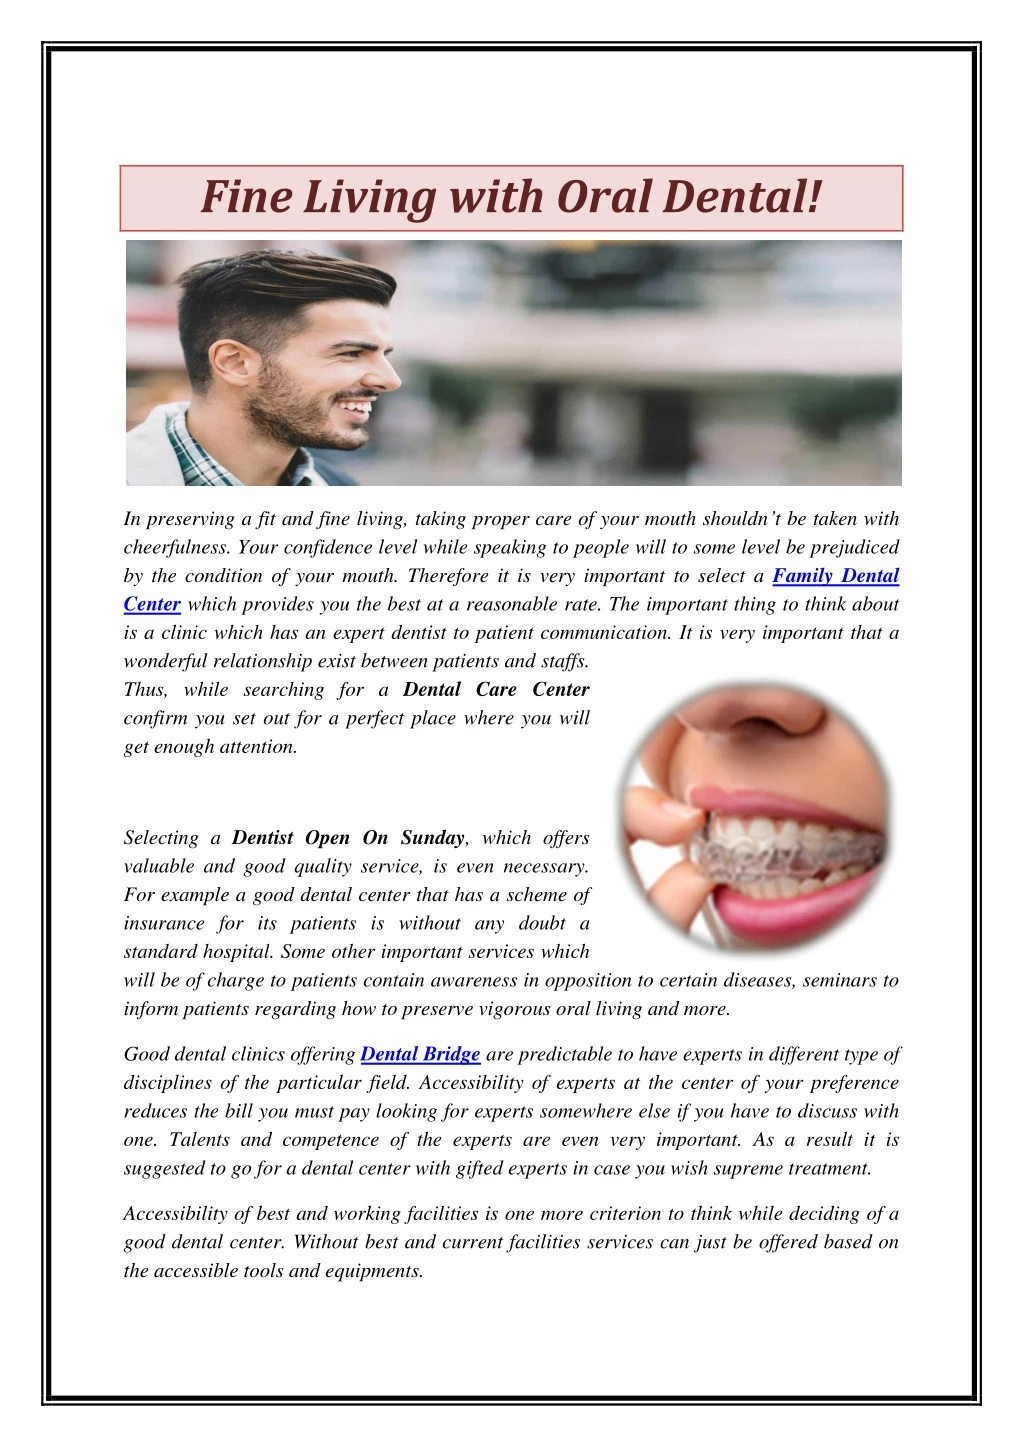 fine living with oral dental